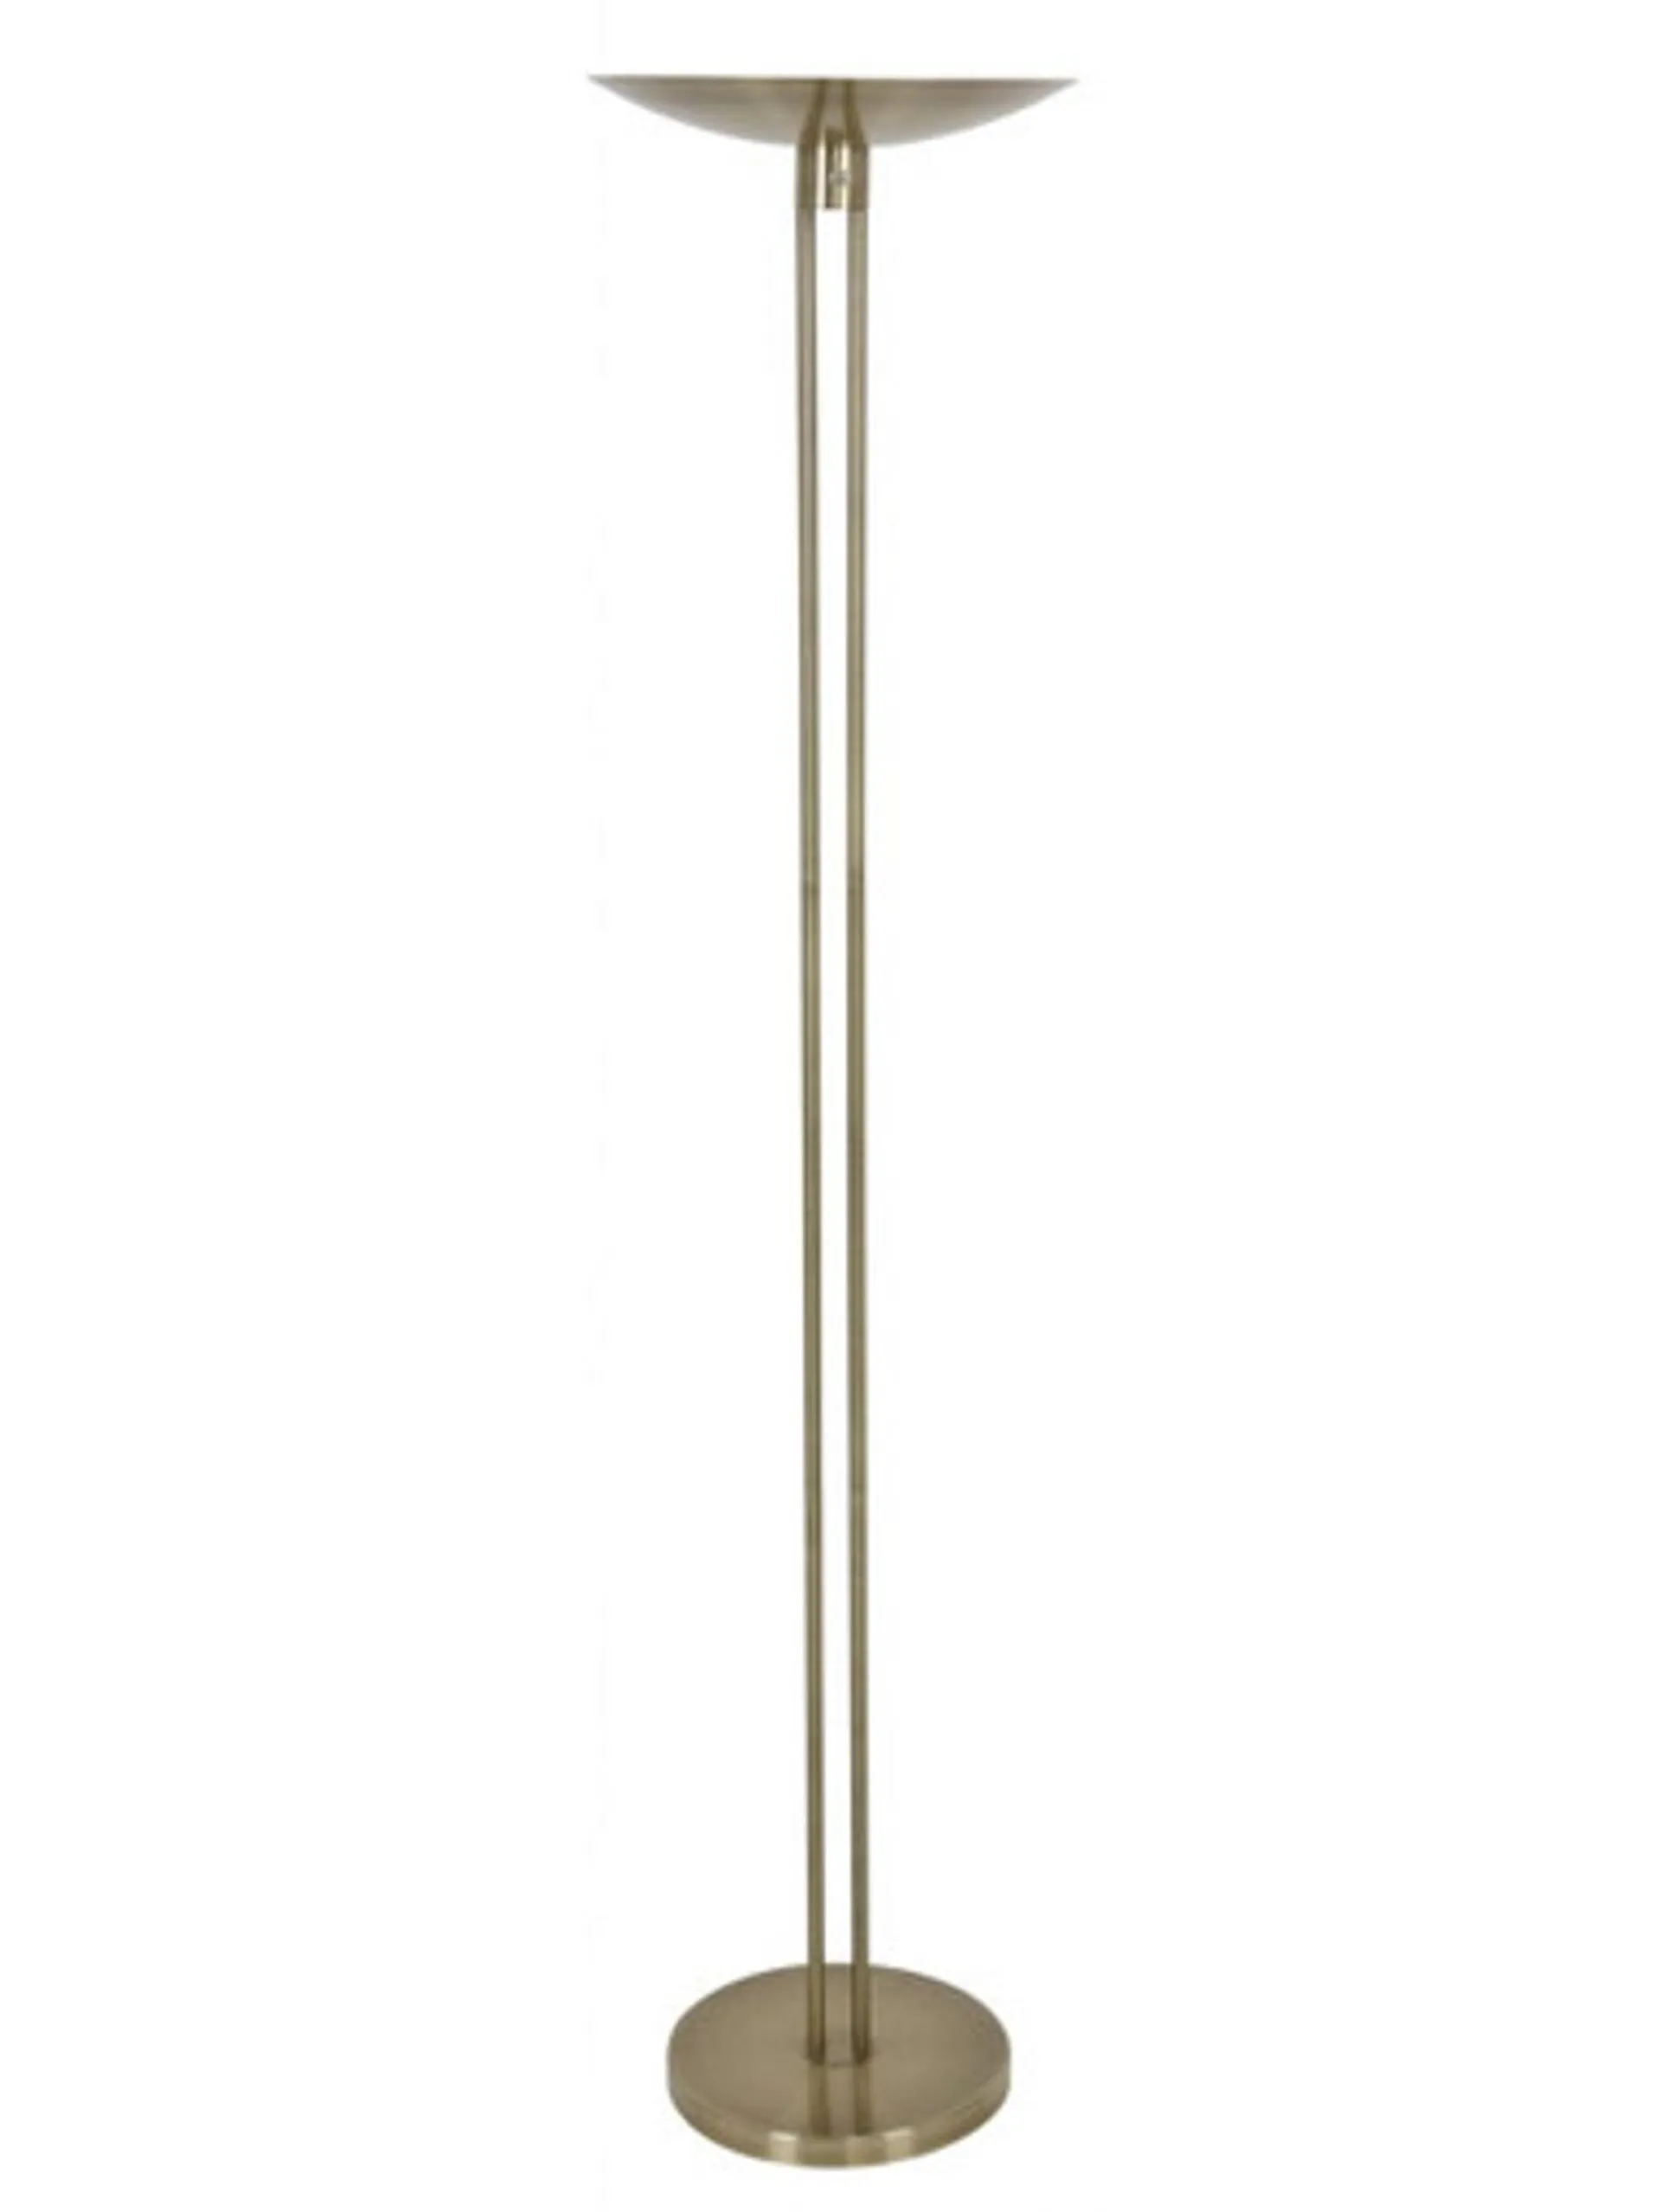 Fredrick Touch Dimmable Floor Lamp Antique Brass